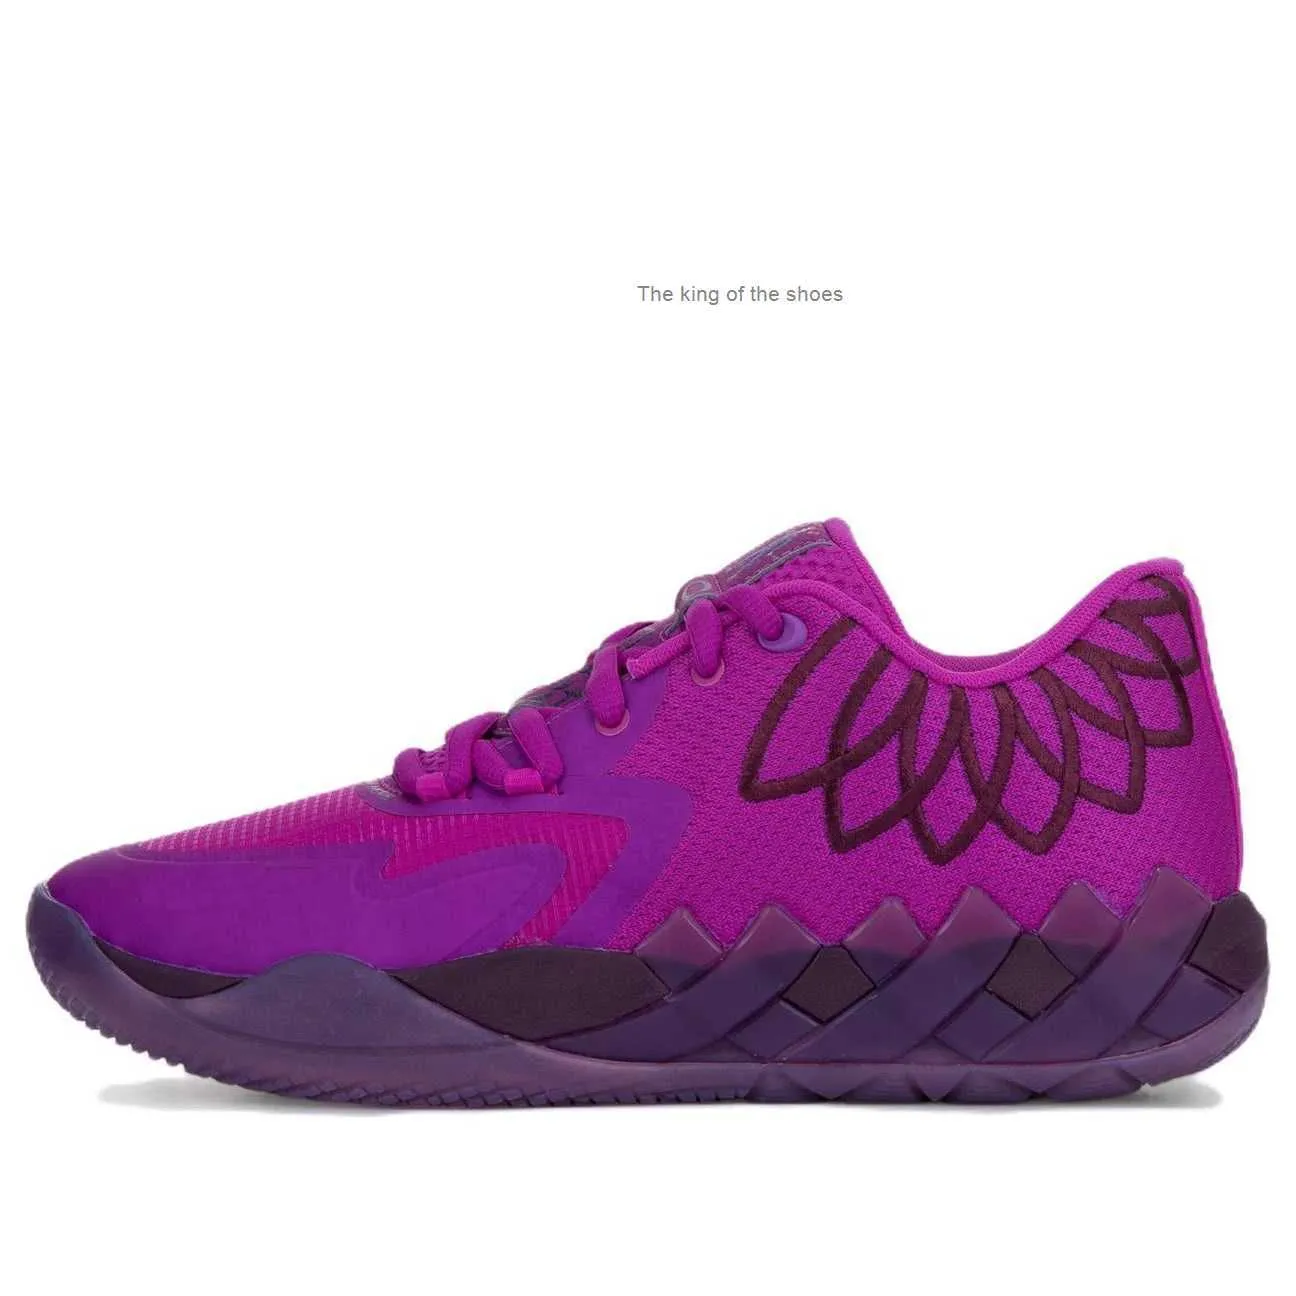 LaMelo Ball MB01 Lo Disco Purple shoes for sale With Box Mens womens Basketball Shoes Sneakers US7.5-US12MB.01